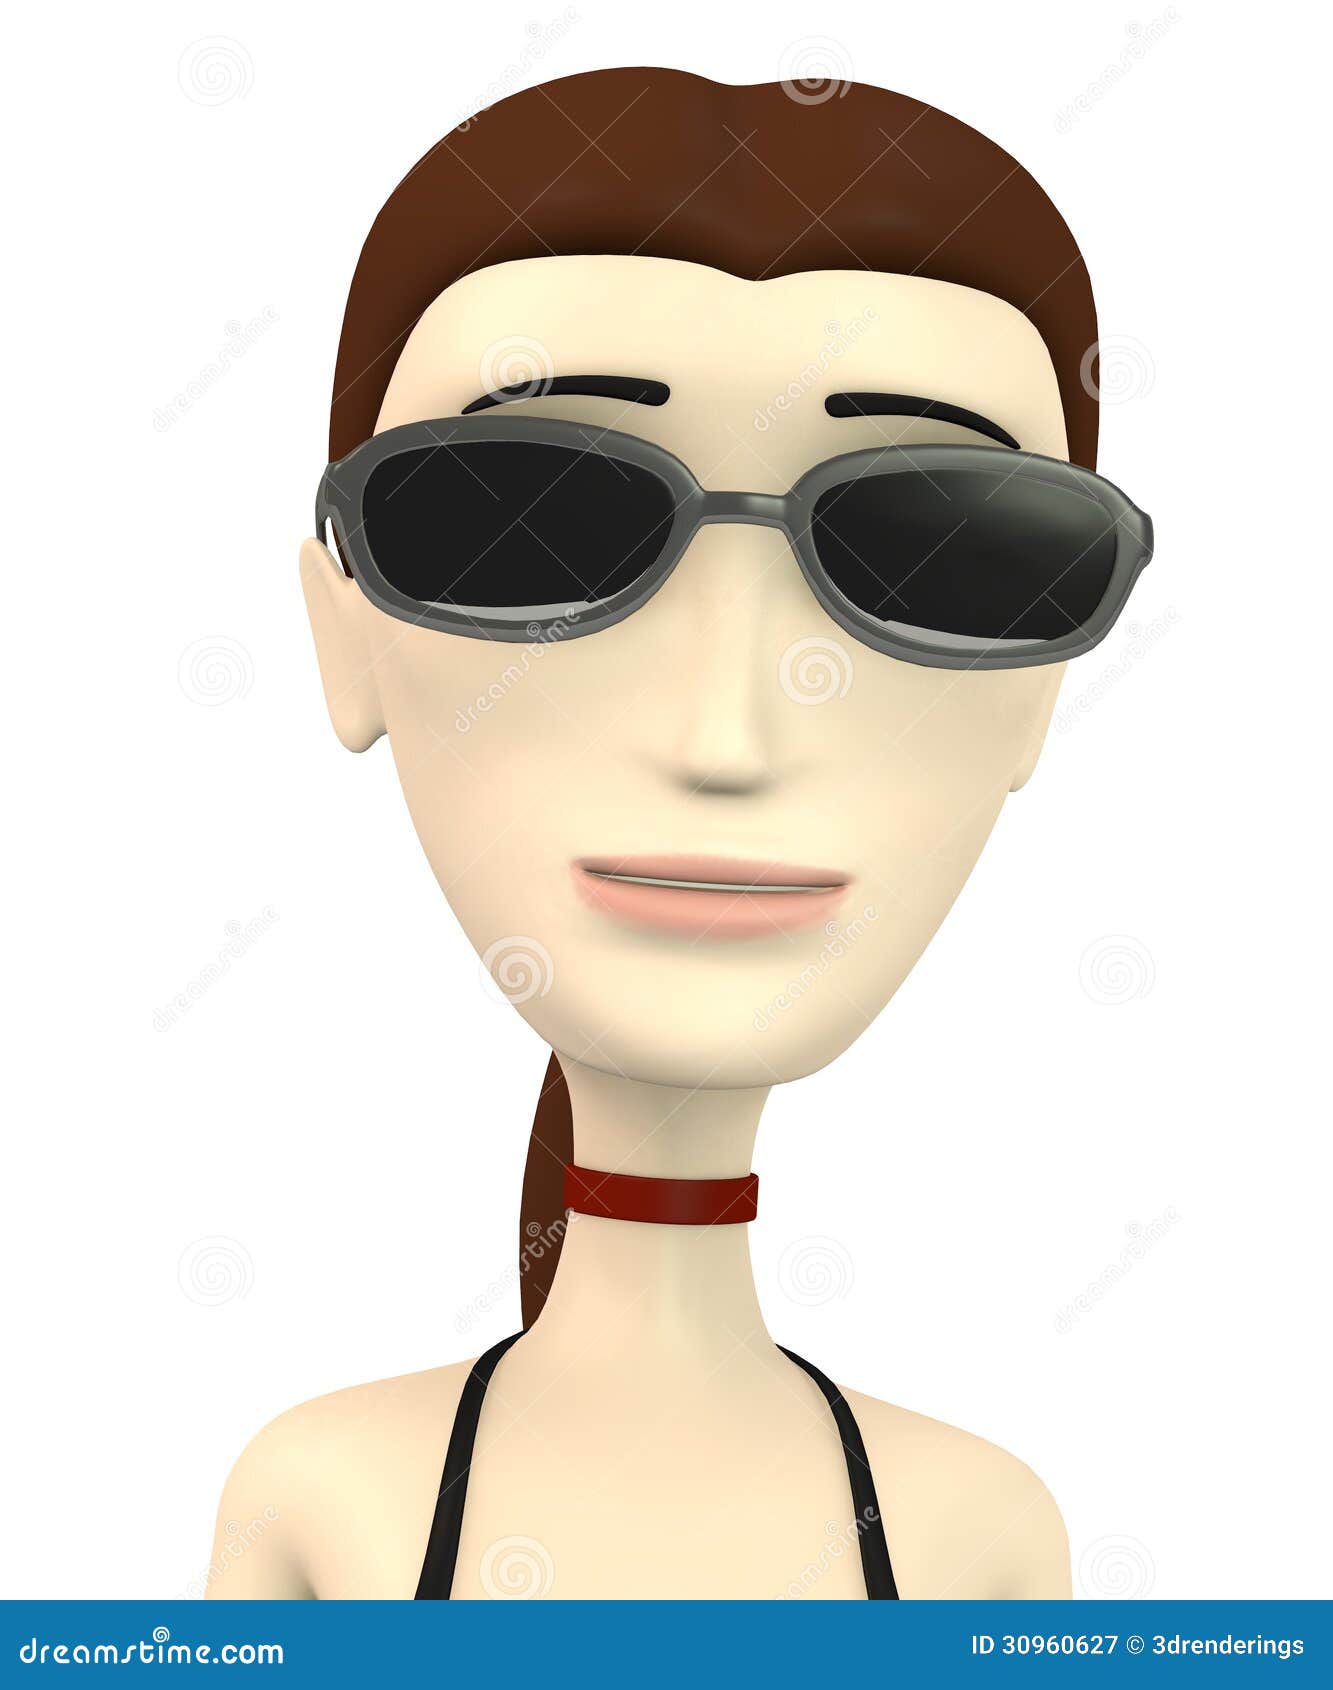 Cartoon Girl With Glasses Royalty Free Stock Photography - Image: 30960627